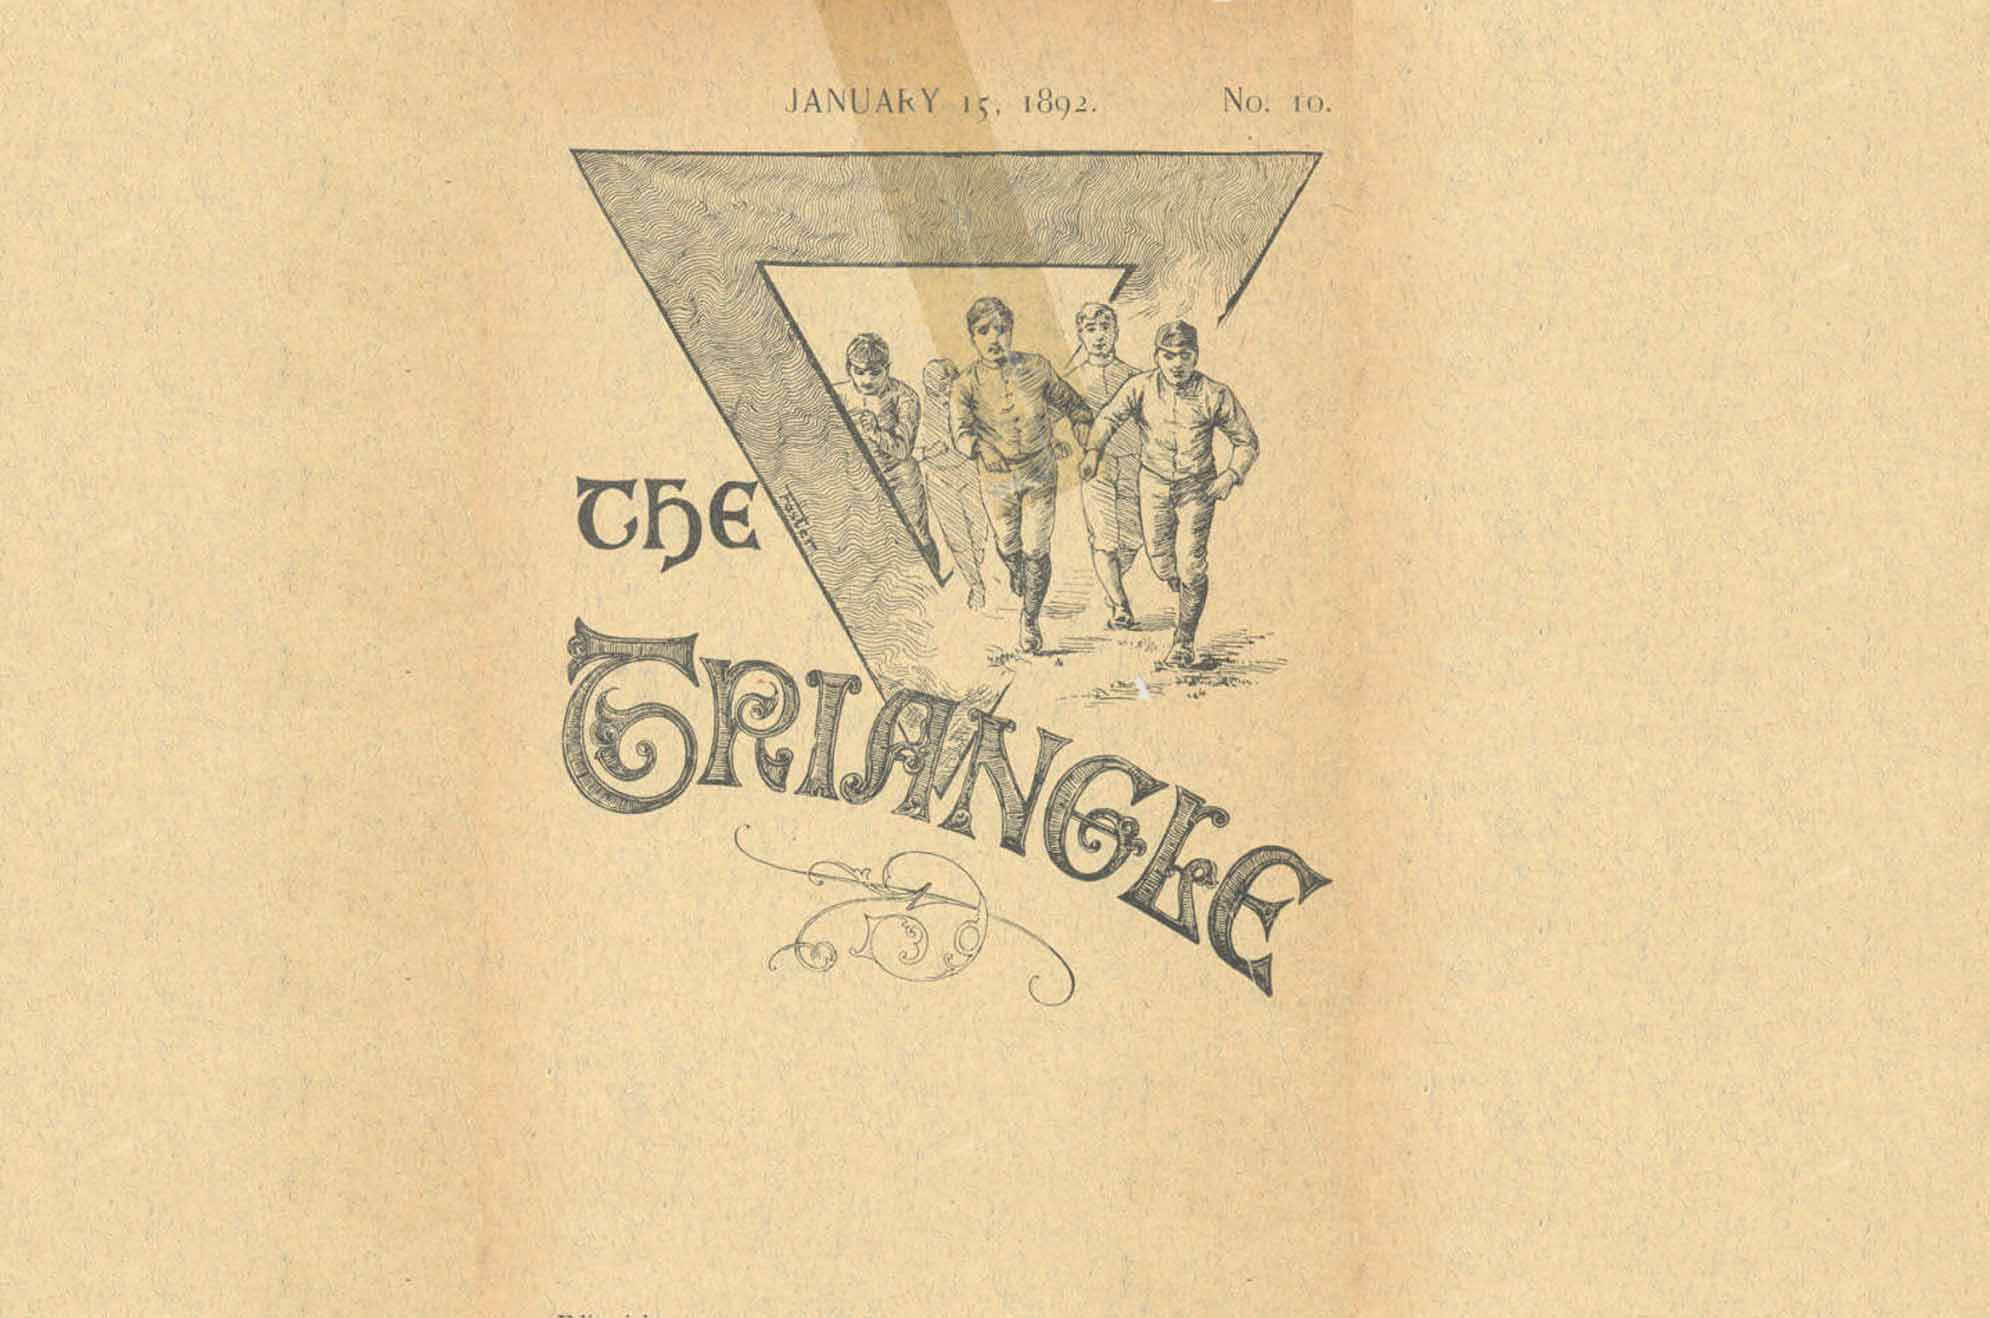 The First Issue of The Triangle